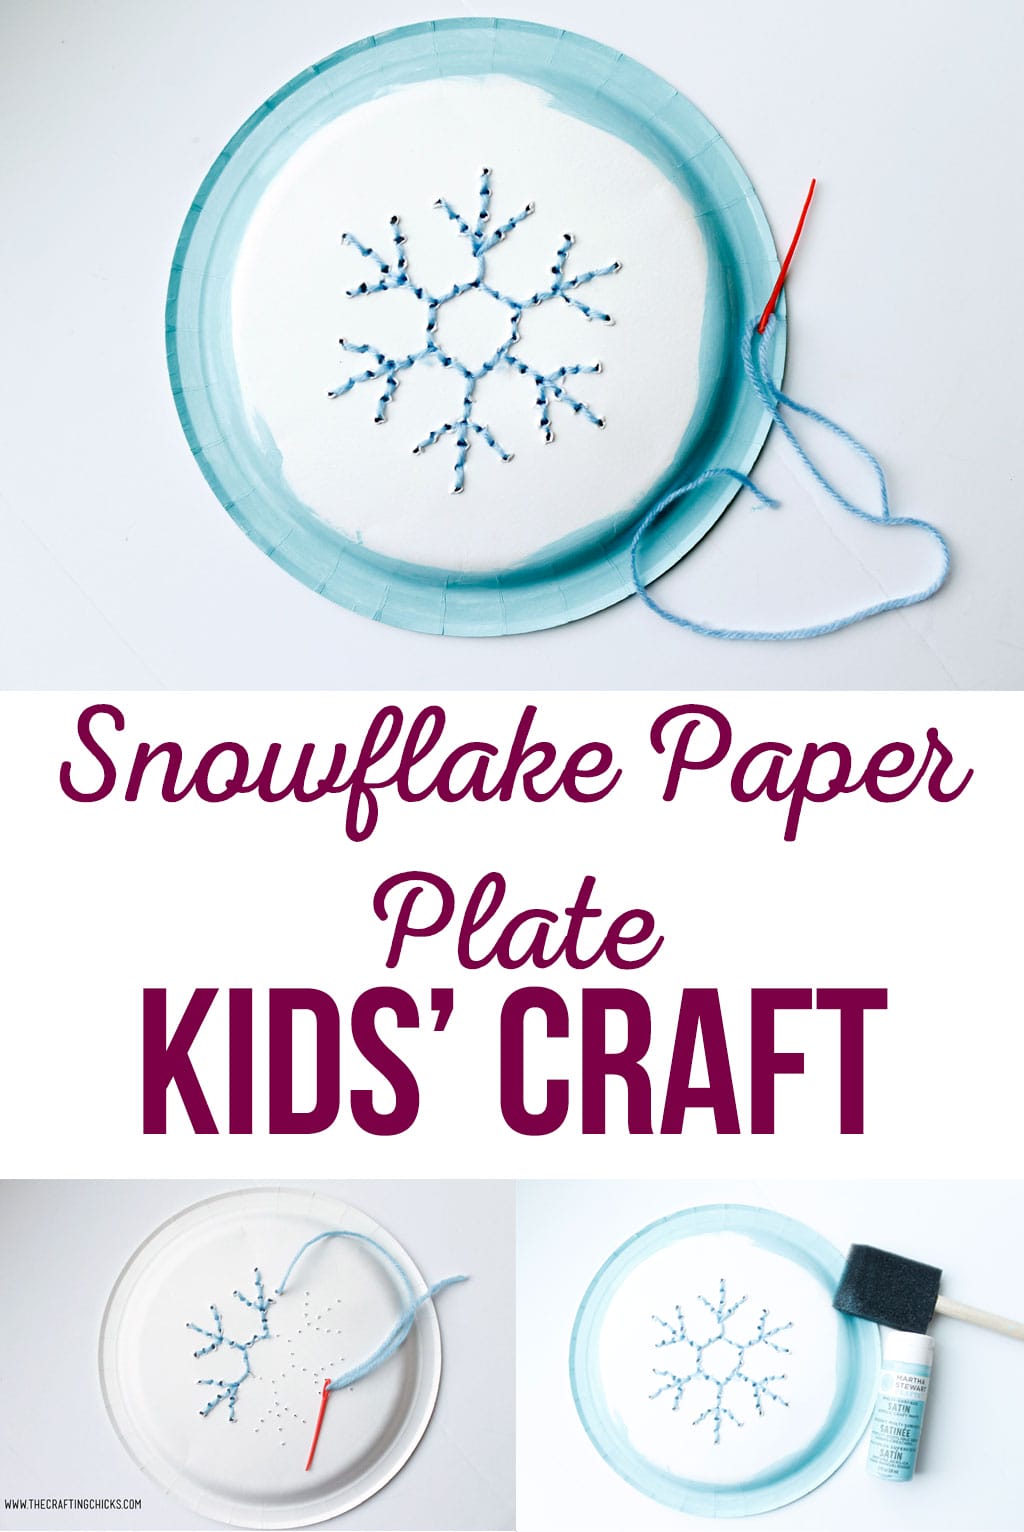 Snowflake Paper Plate Kids Craft is a great craft idea for winter break. Snowflake Paper Plate Kids' Craft is a fun project for kids to work on. They will love using fine motor skills to create a snowflake with yarn.